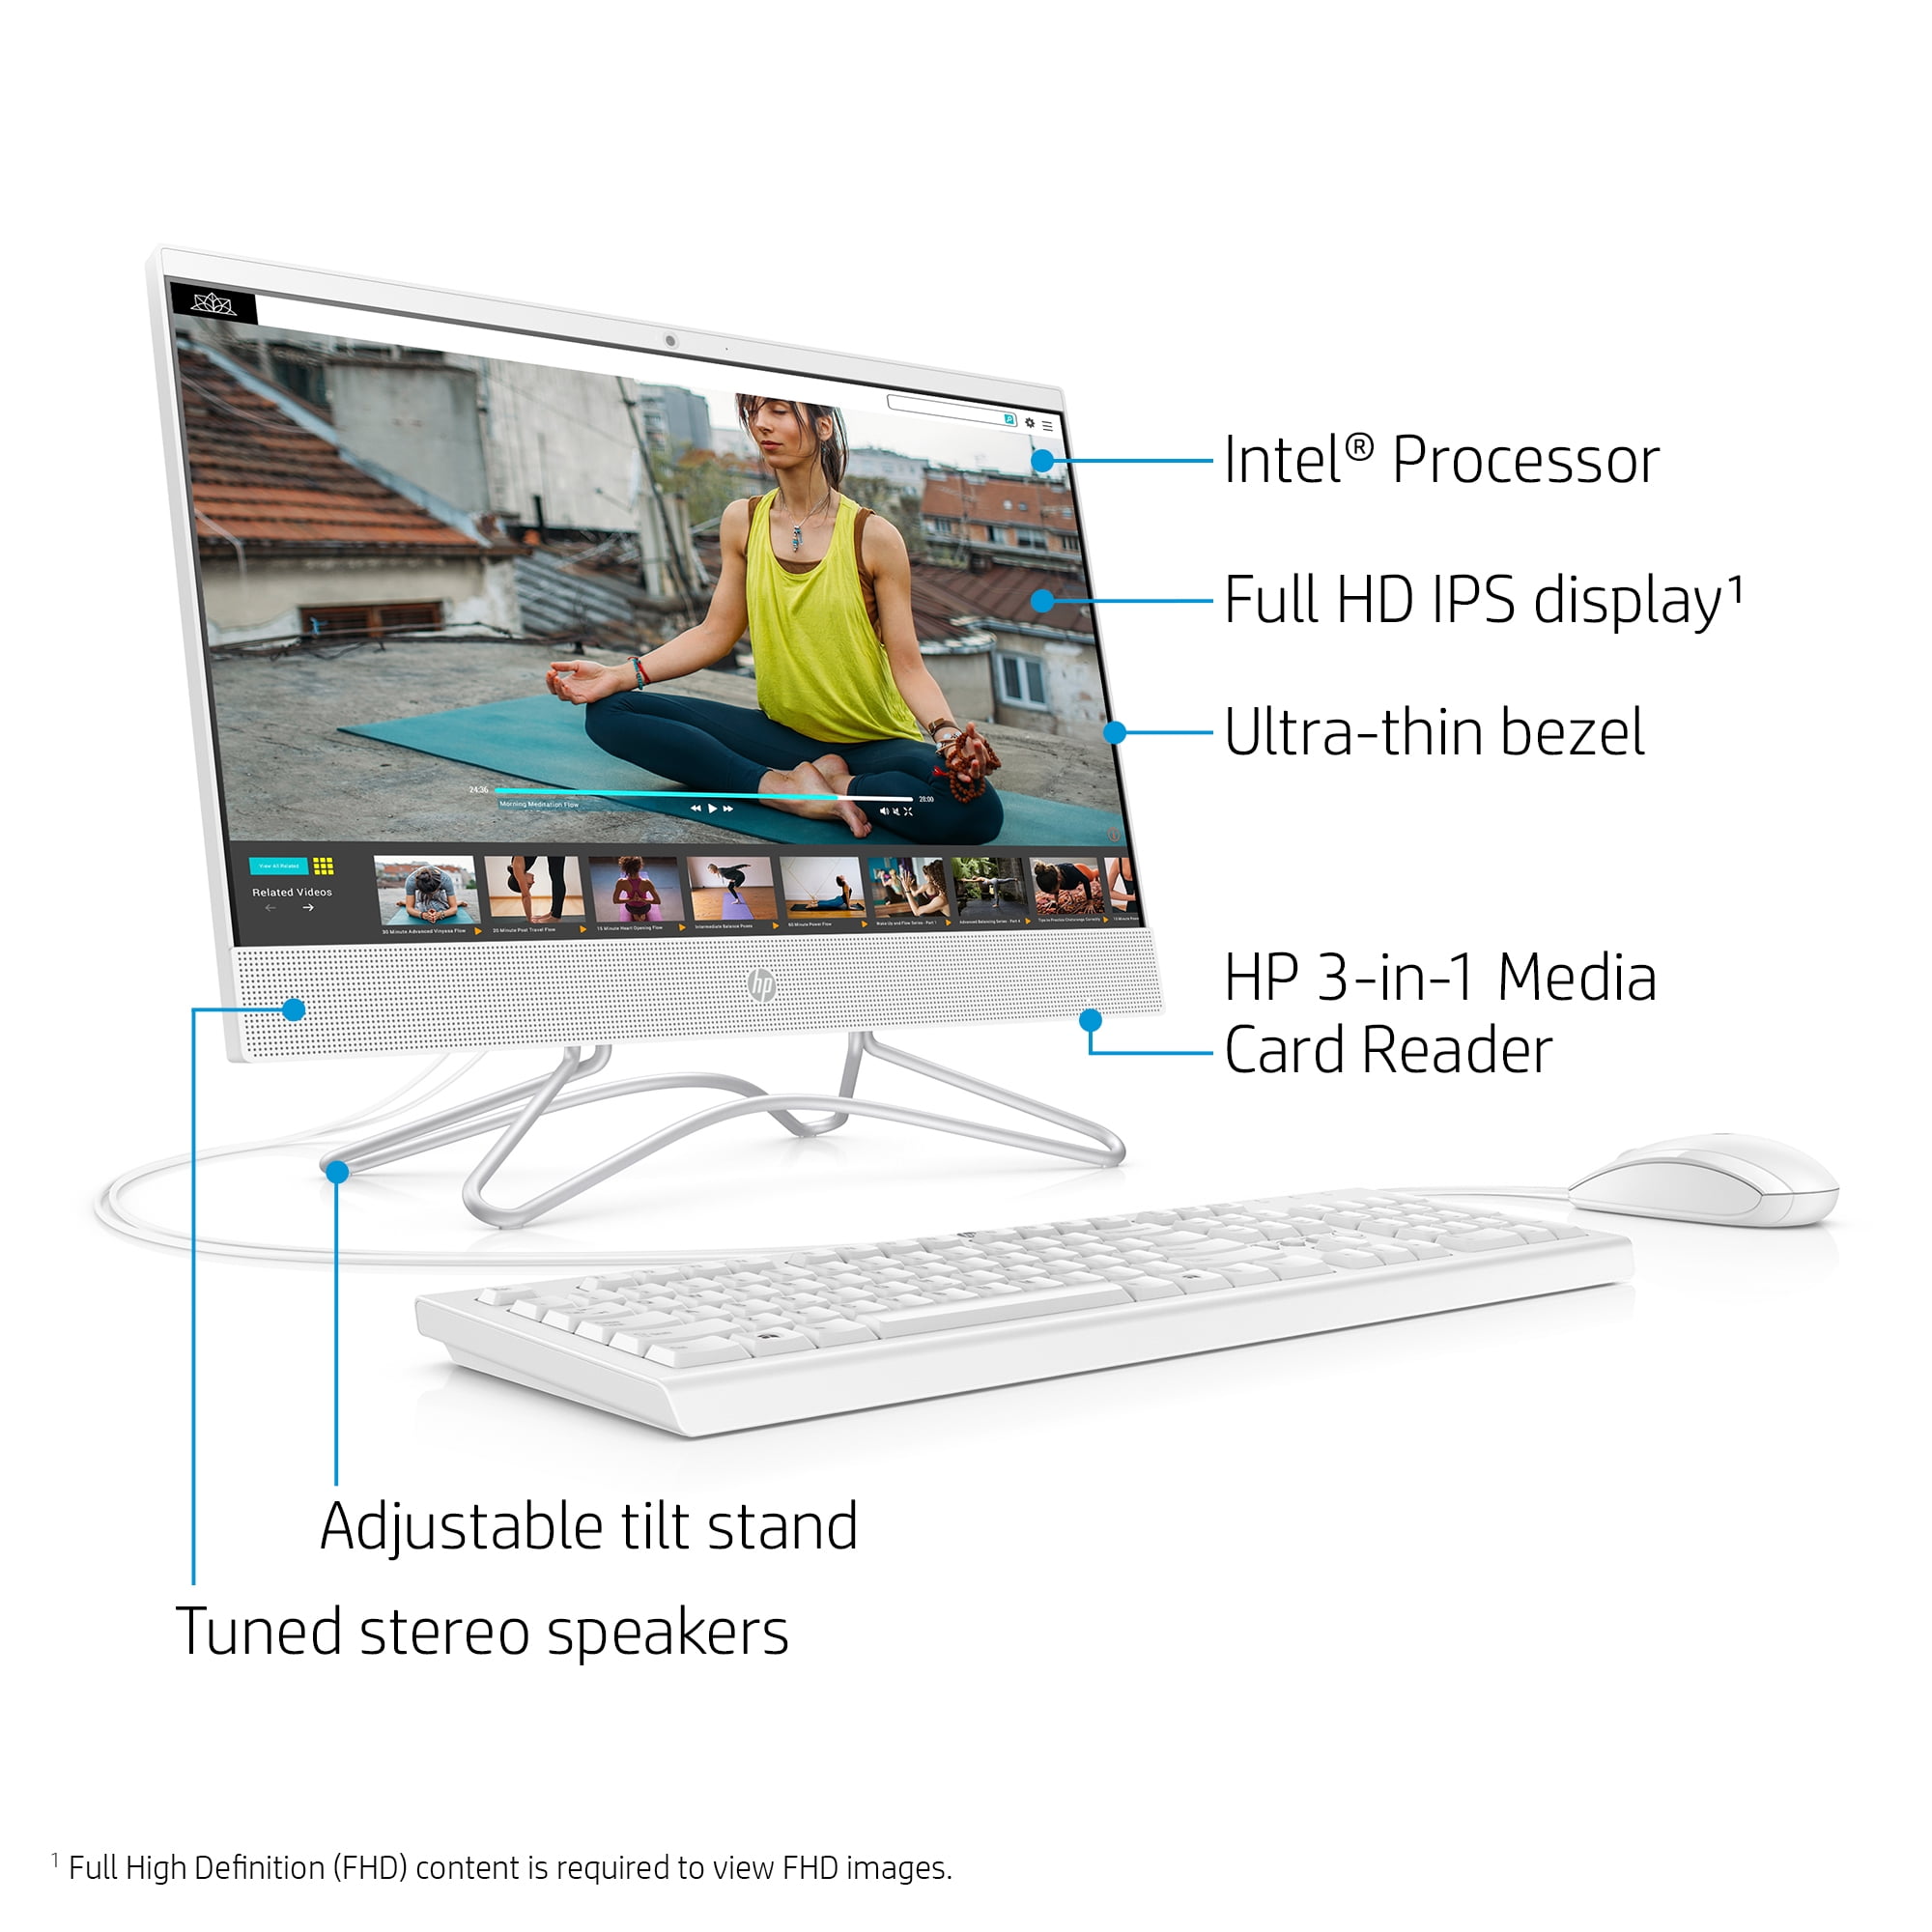 HP 22 All-in-One, 21.5